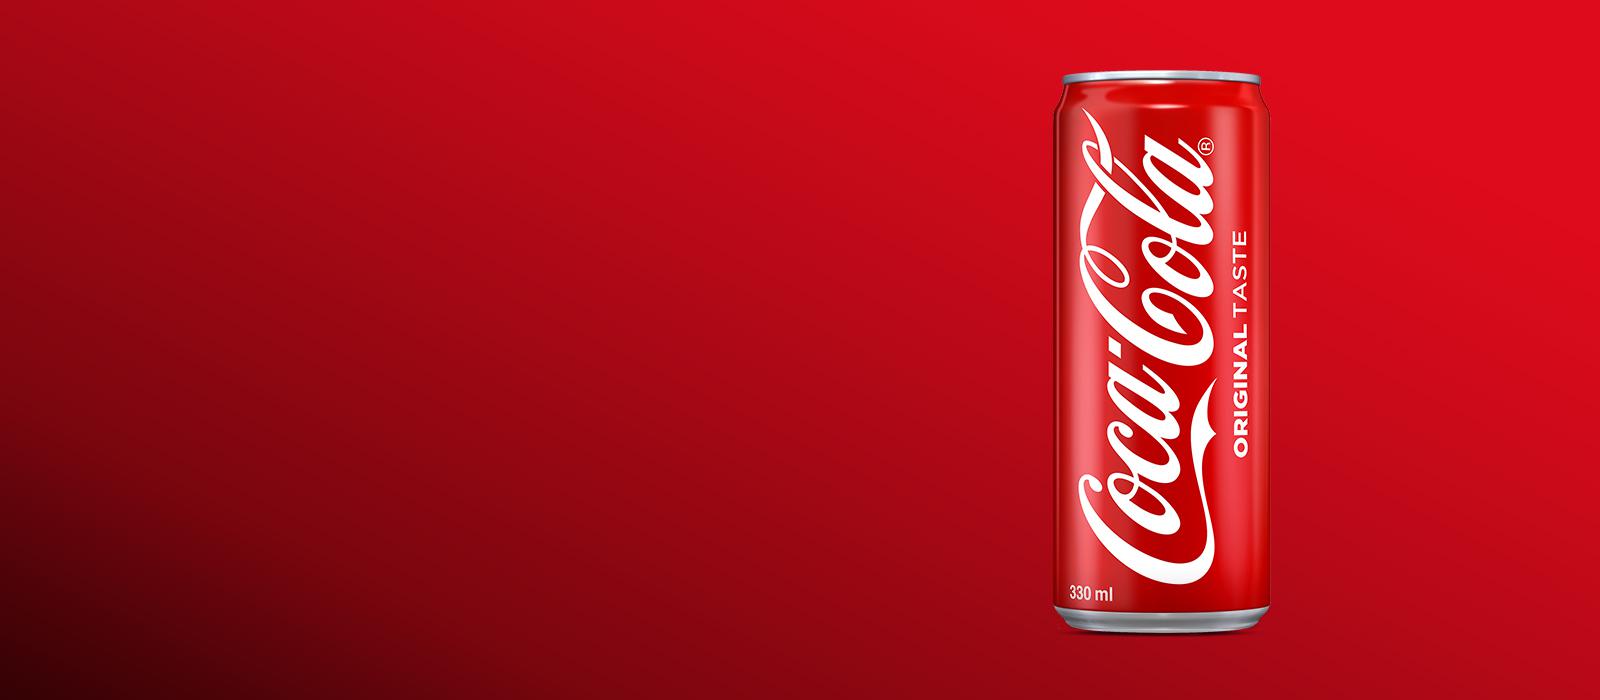 Coca-Cola logo on red background